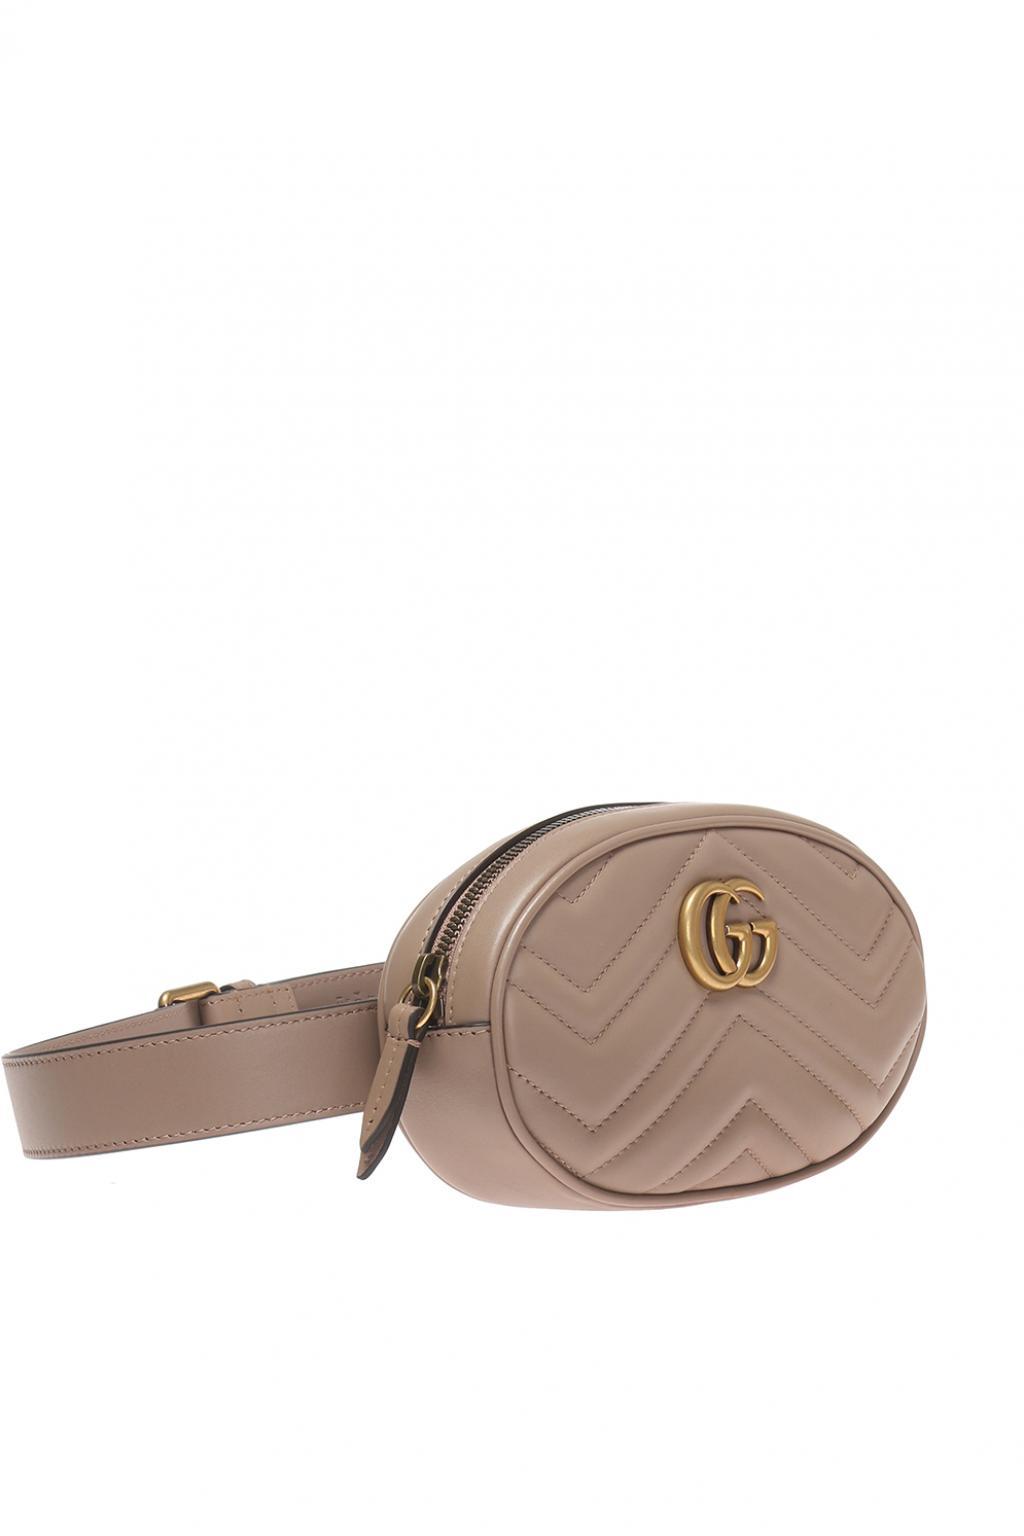 Gucci Leather 'GG Marmont' Belt Bag in Beige (Natural) - Lyst